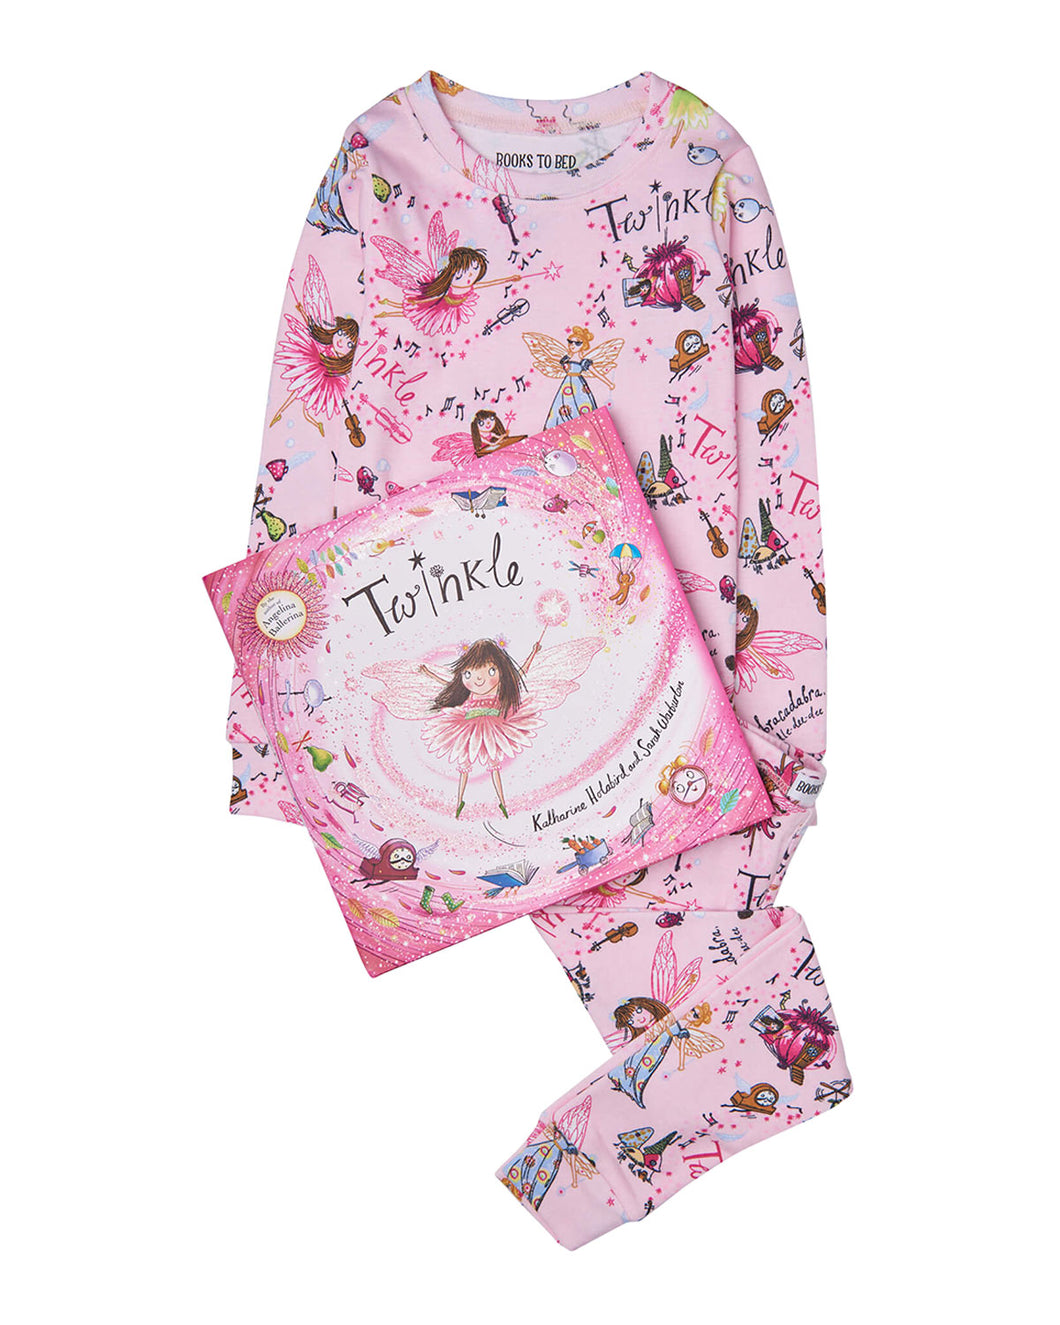 Twinkle Books To Bed Set